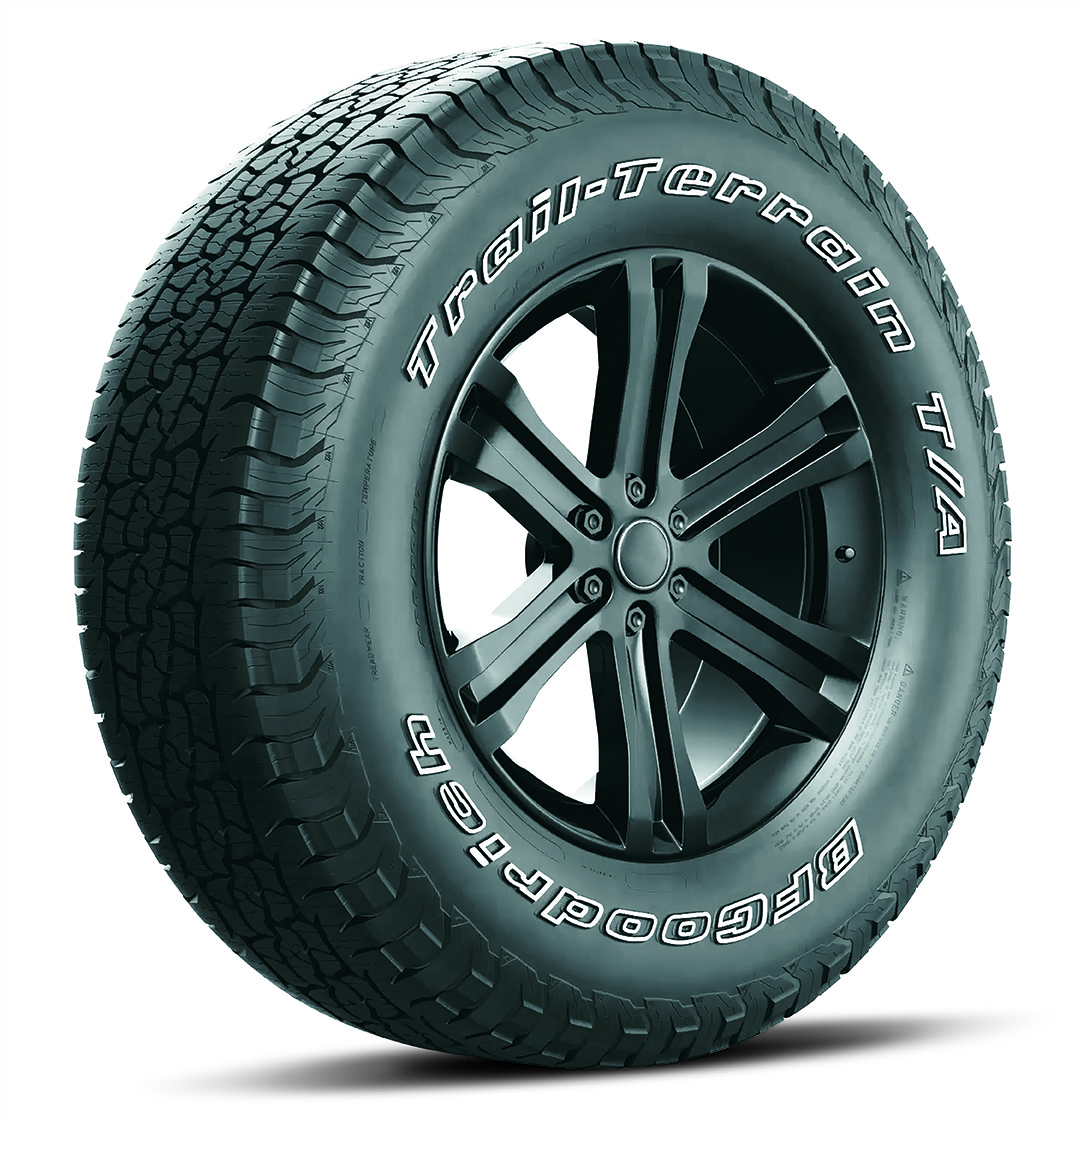 BFGoodrich Trail Terrain TA - Tyre Reviews and Tests